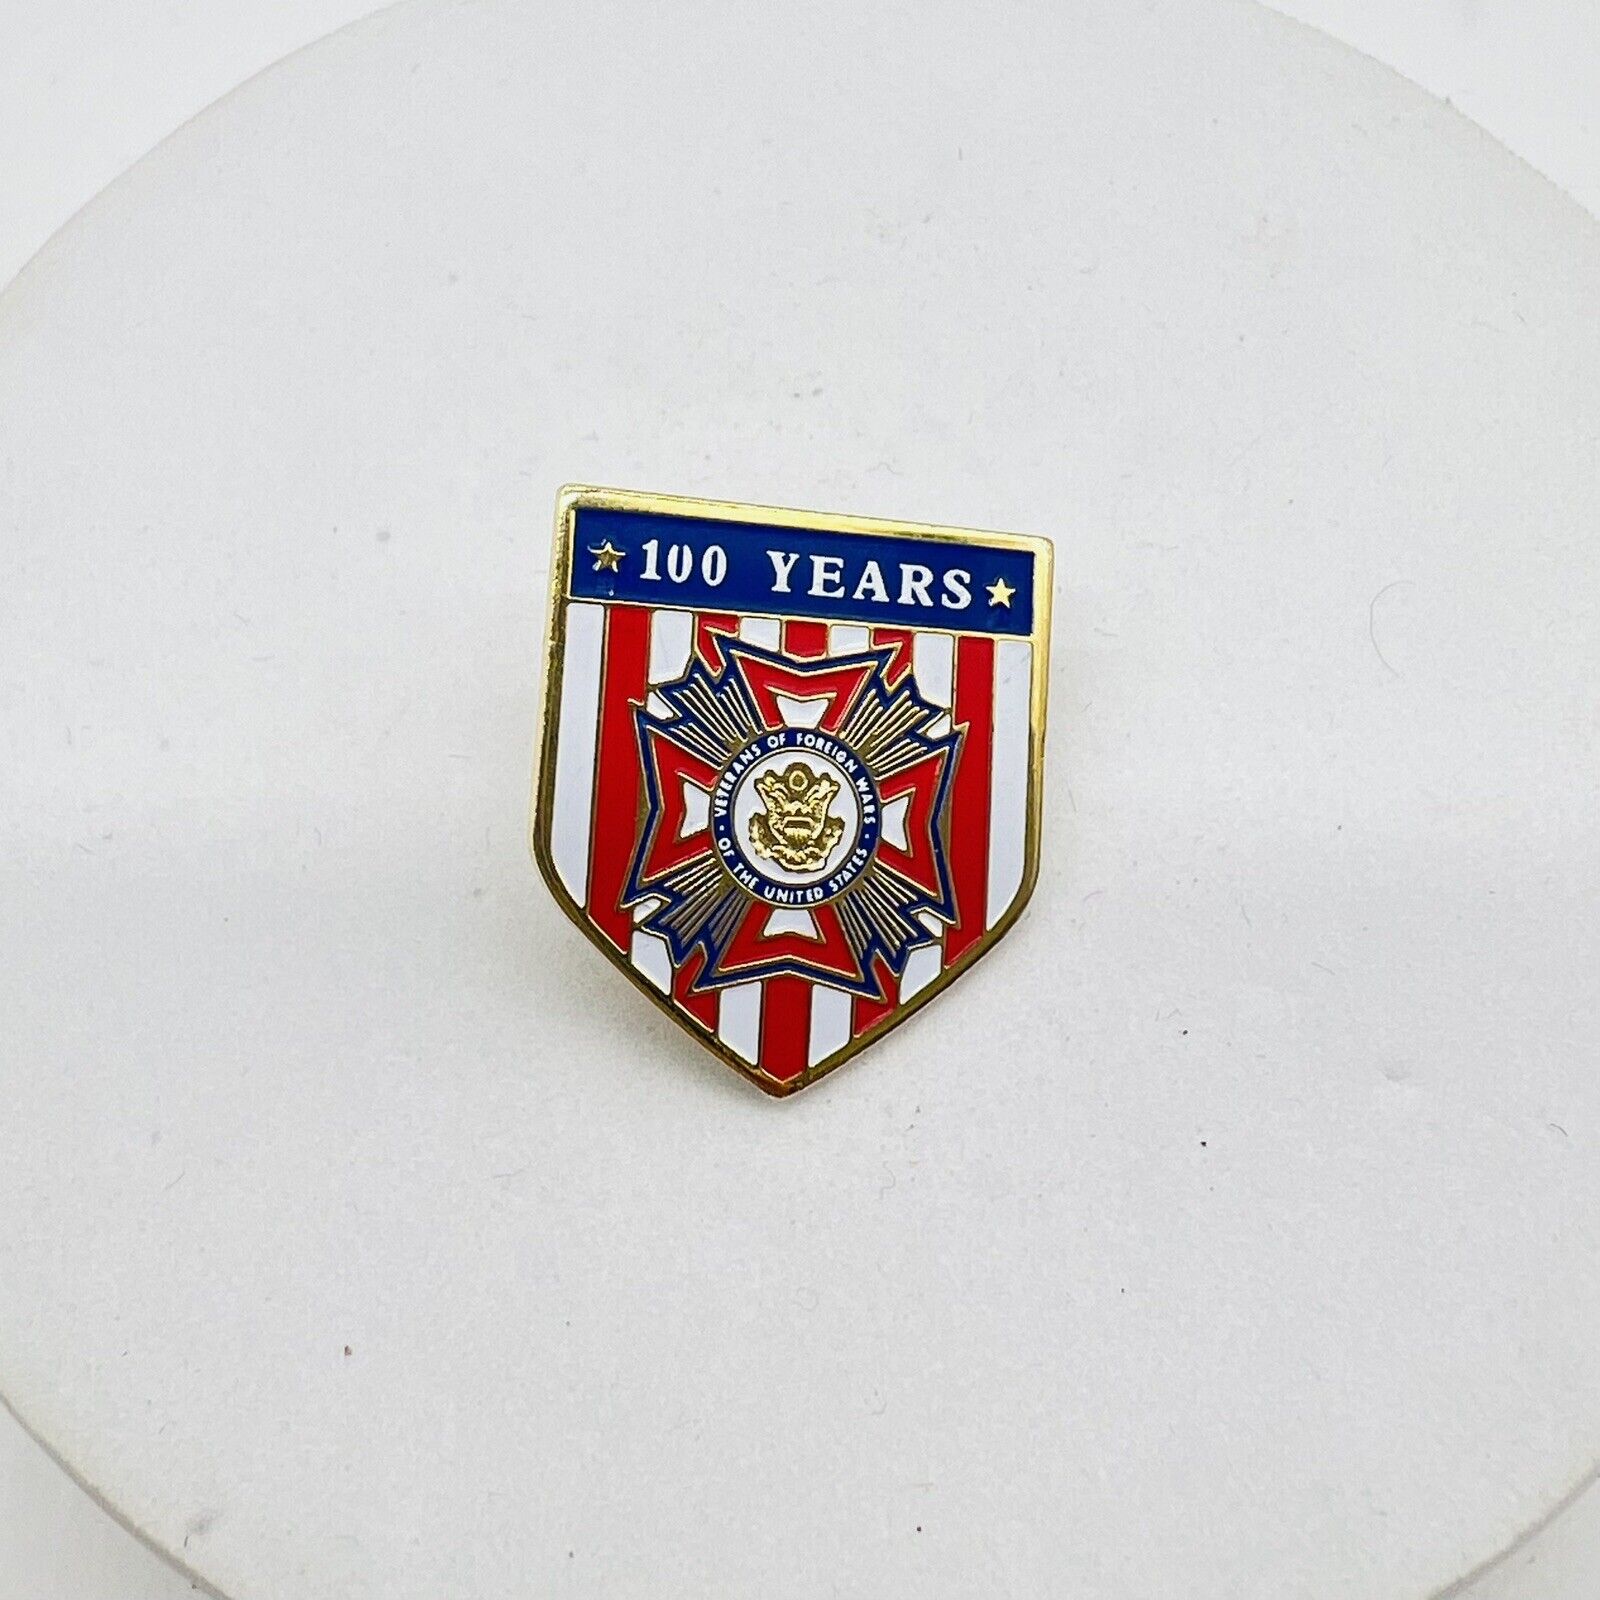 VFW 100 Year Anniversary Lapel Pin Veterans of Foreign Wars of the United States